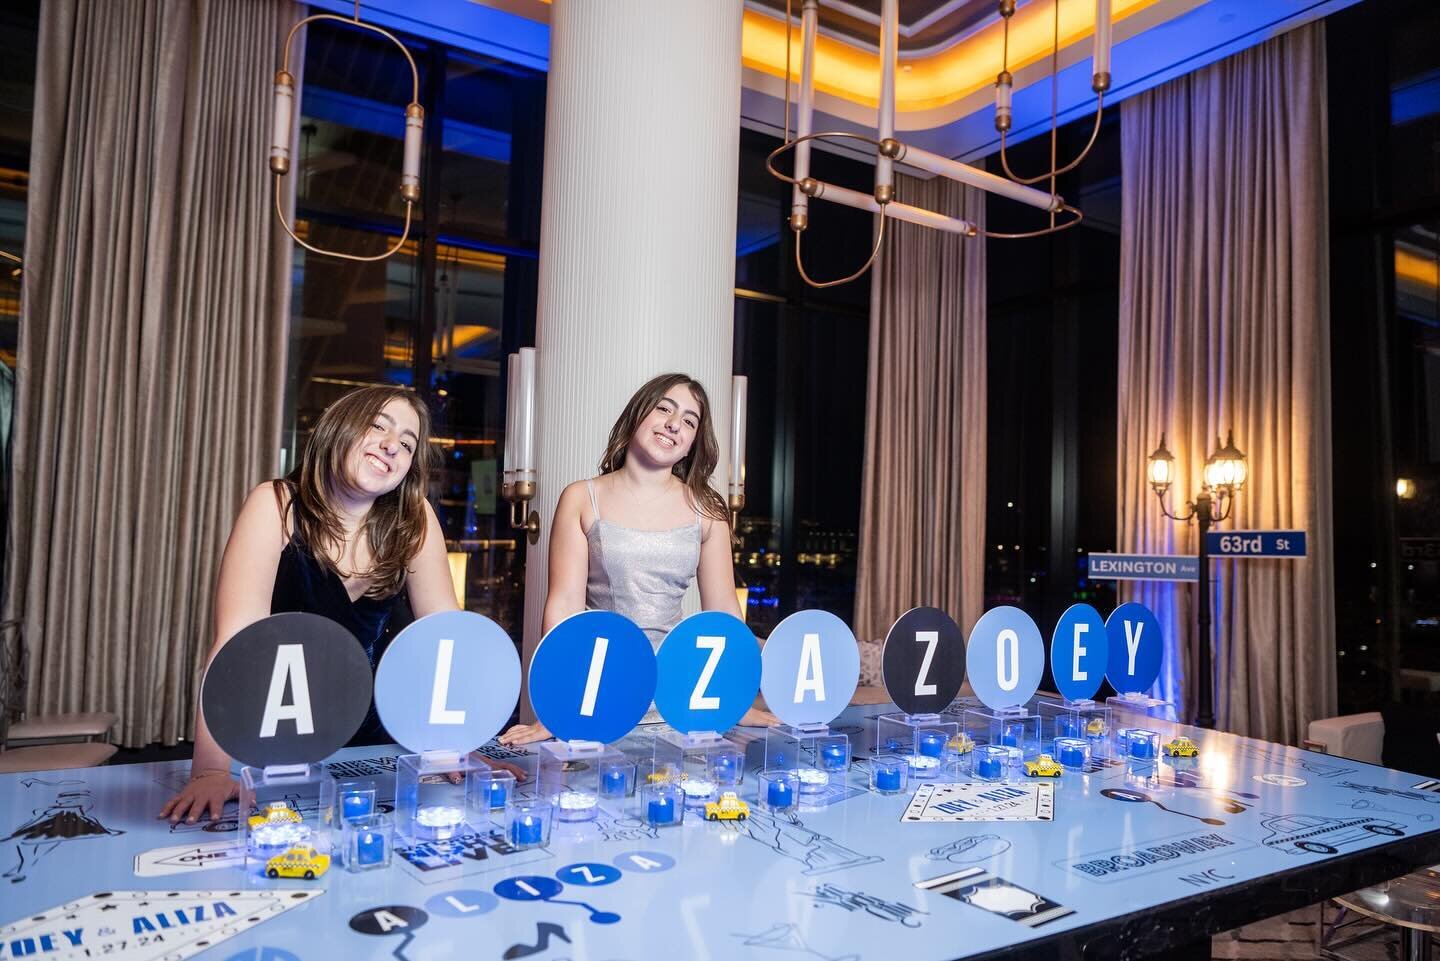 Concrete jungle where mitzvah dreams are made of! Aliza &amp; Zoey living their best New York life 🏙️

#mitzvah #mitzvahplanner #mitzvahdecor #mitzvahdesign #bnaimitzvah #batmitzvahparty #barmitzvahphotography #events #eventplanner #dceventplanner #